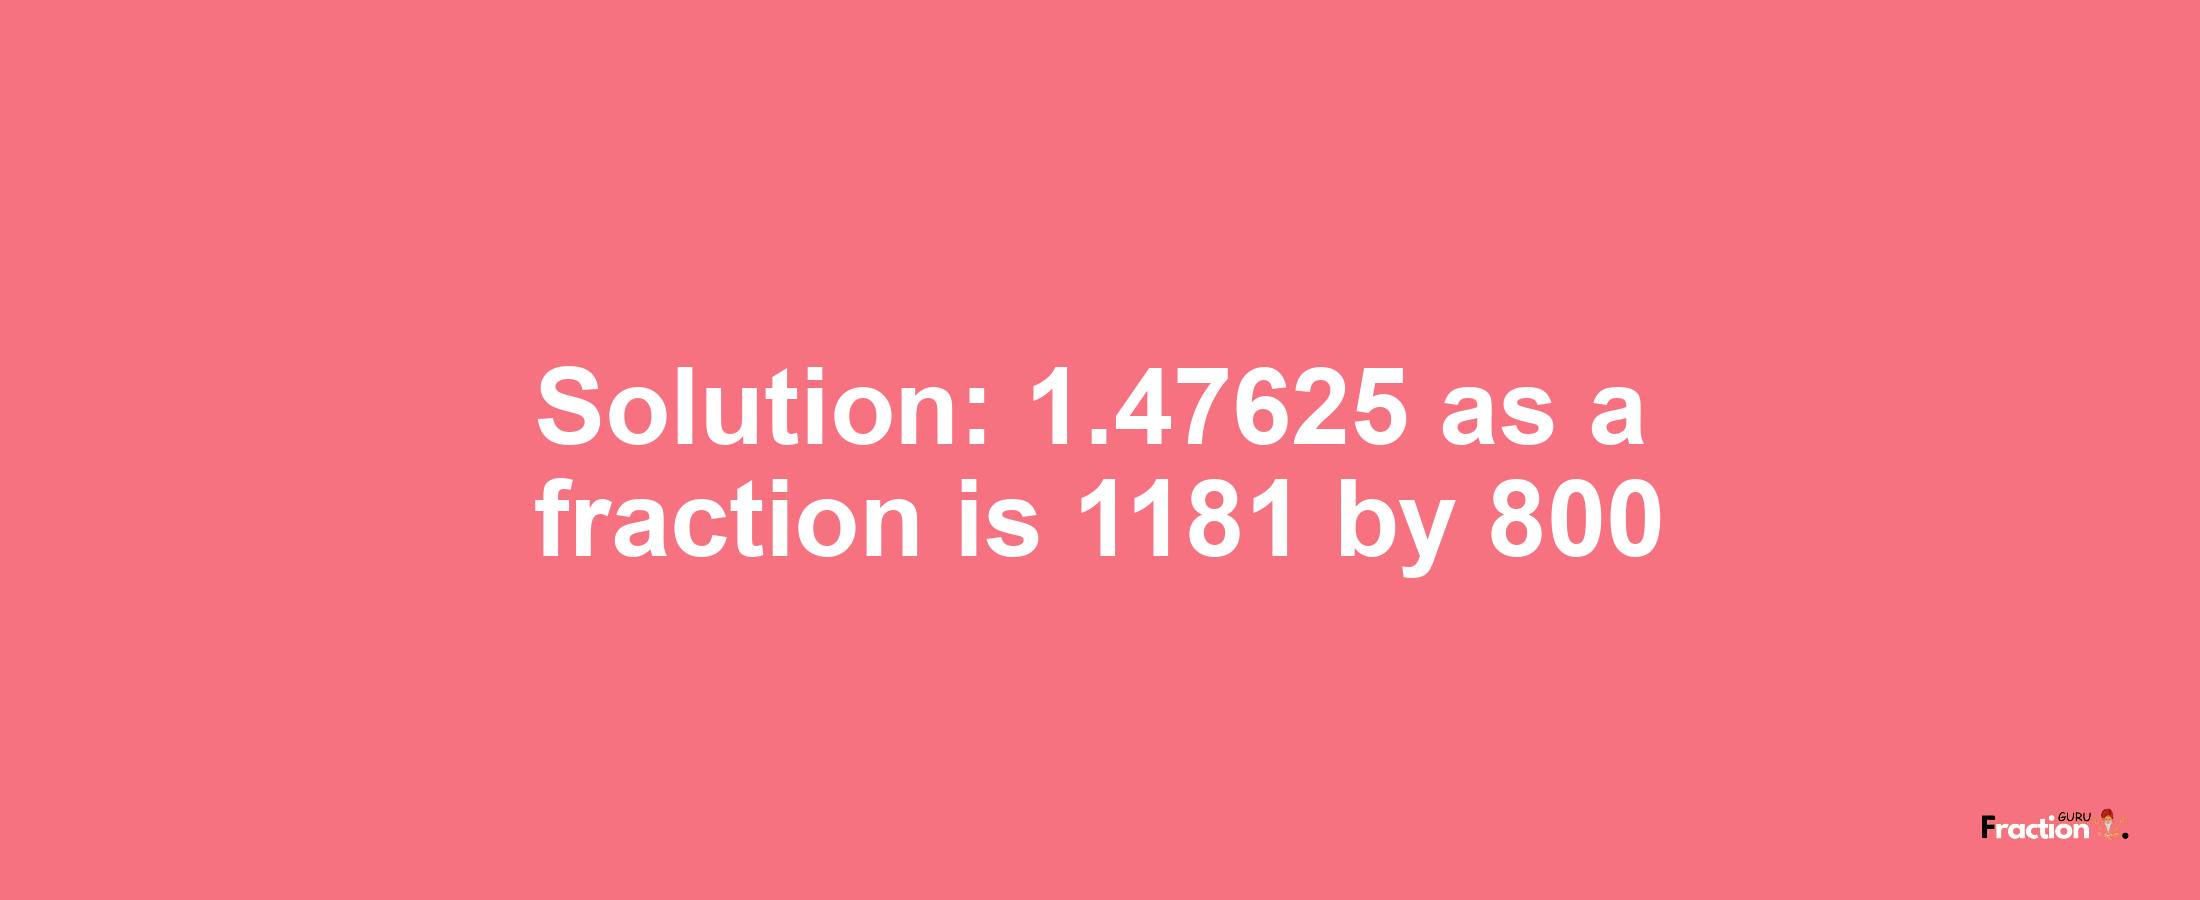 Solution:1.47625 as a fraction is 1181/800